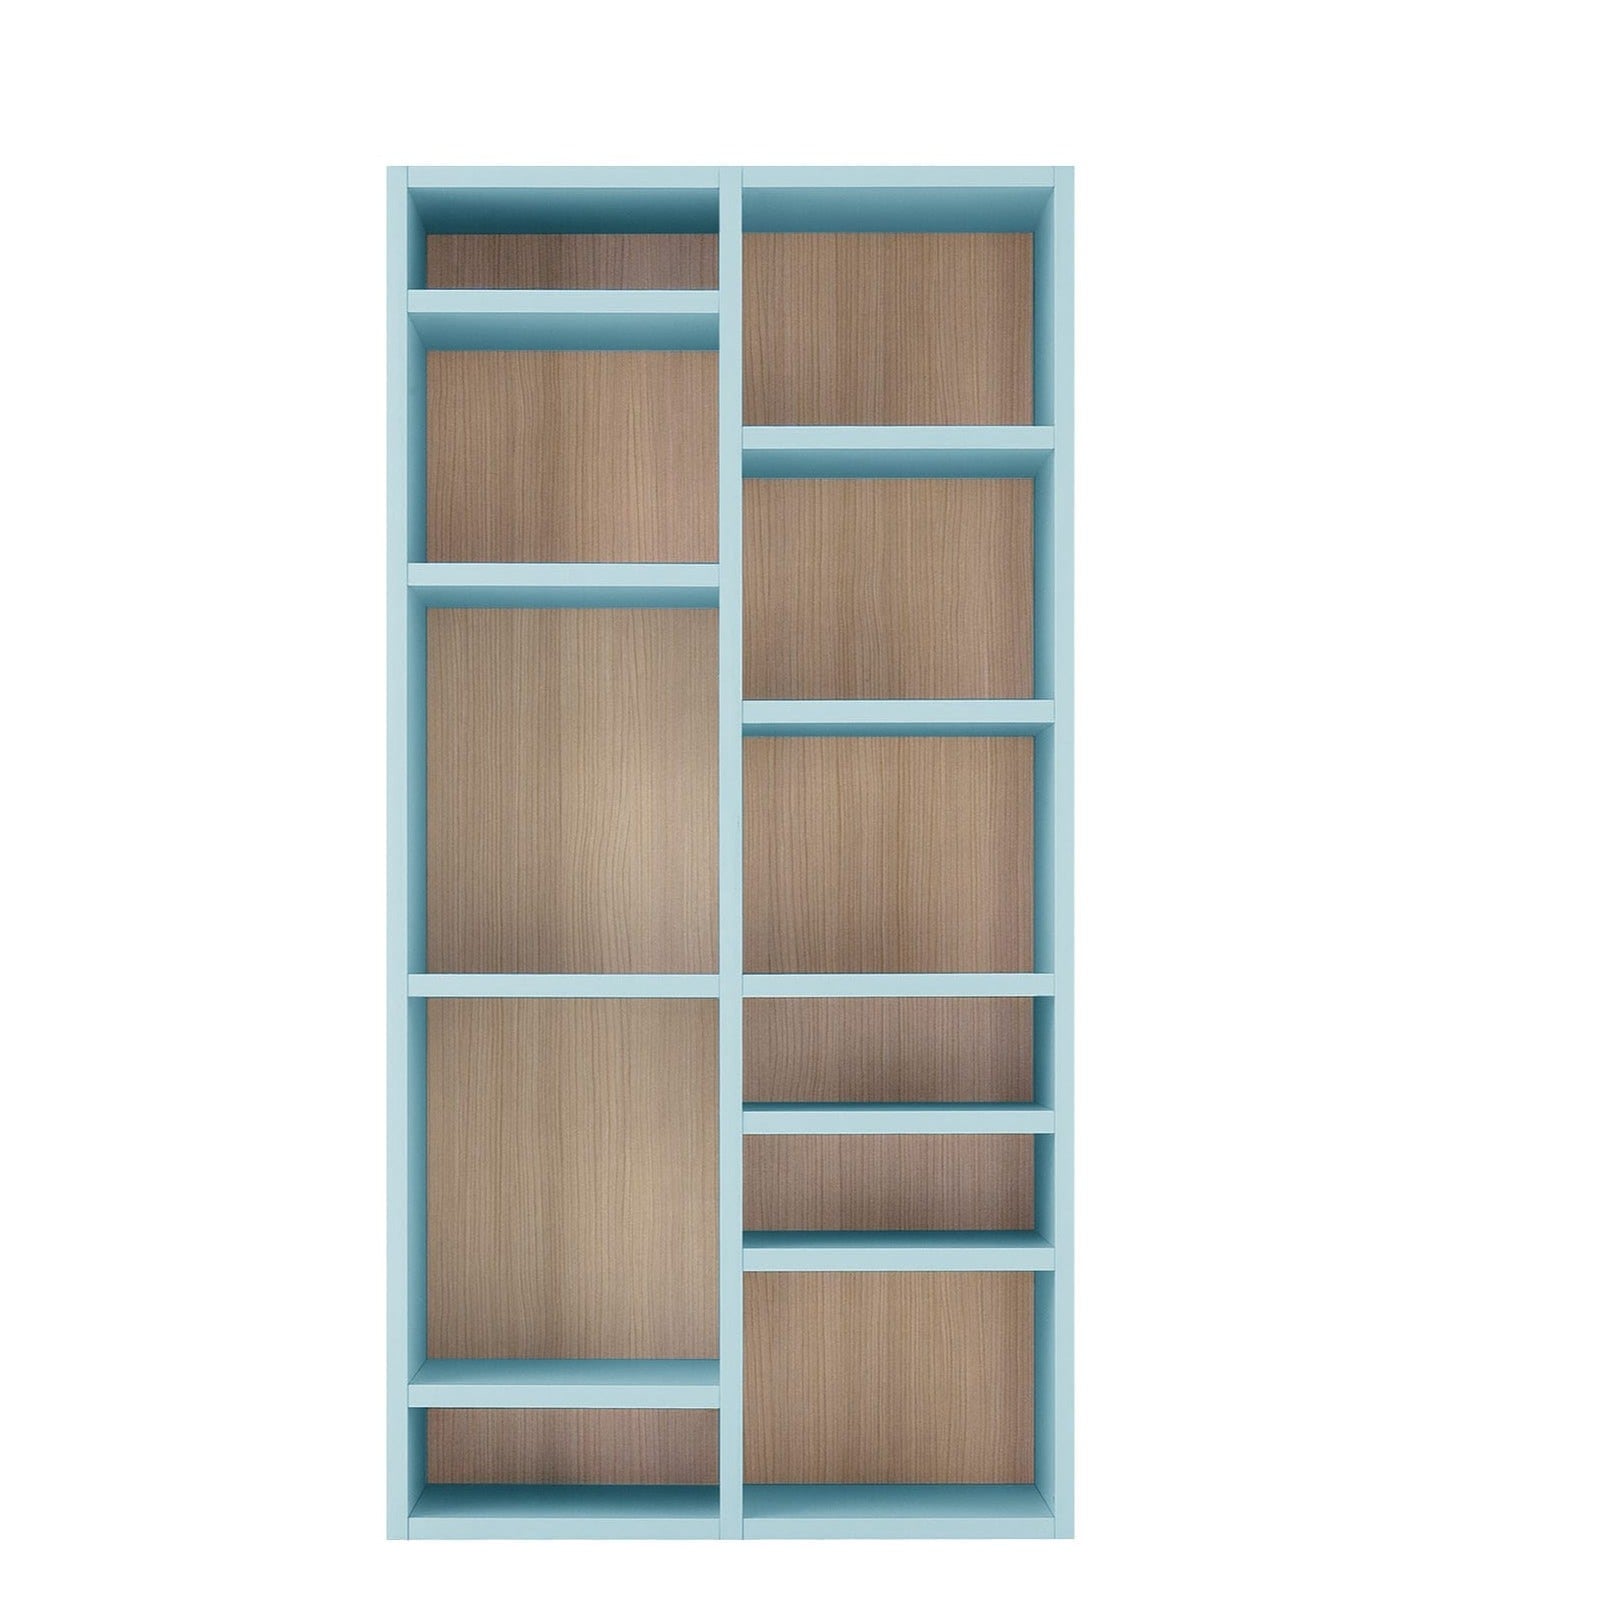 Bespoke Tall Holly Bookshelf by Nidi – Various heights and colours